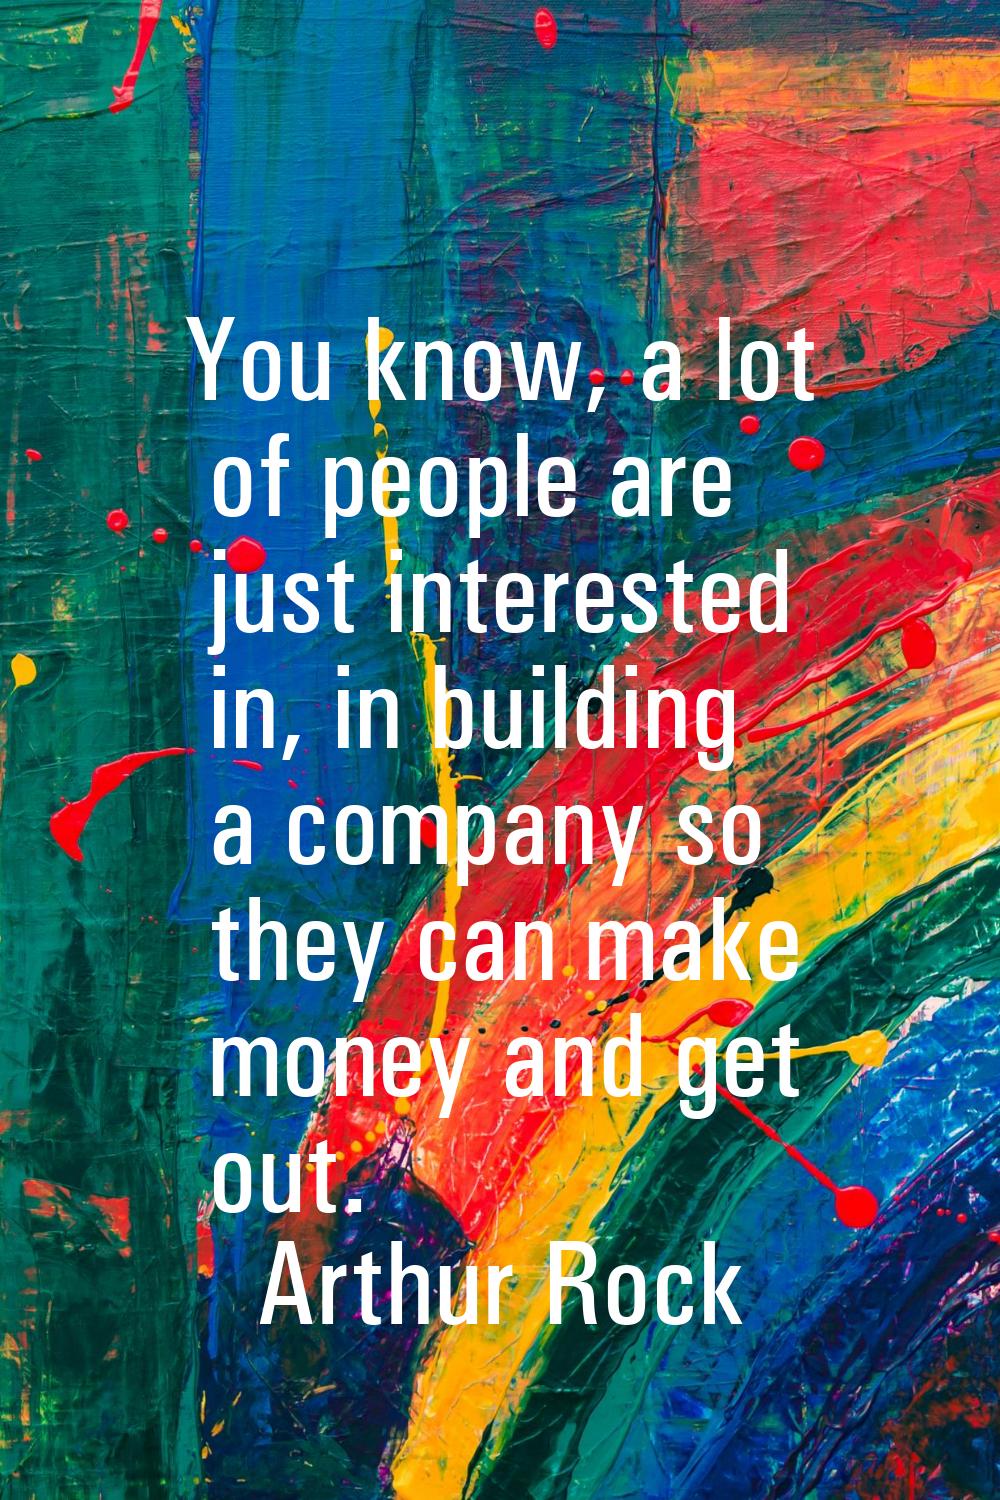 You know, a lot of people are just interested in, in building a company so they can make money and 